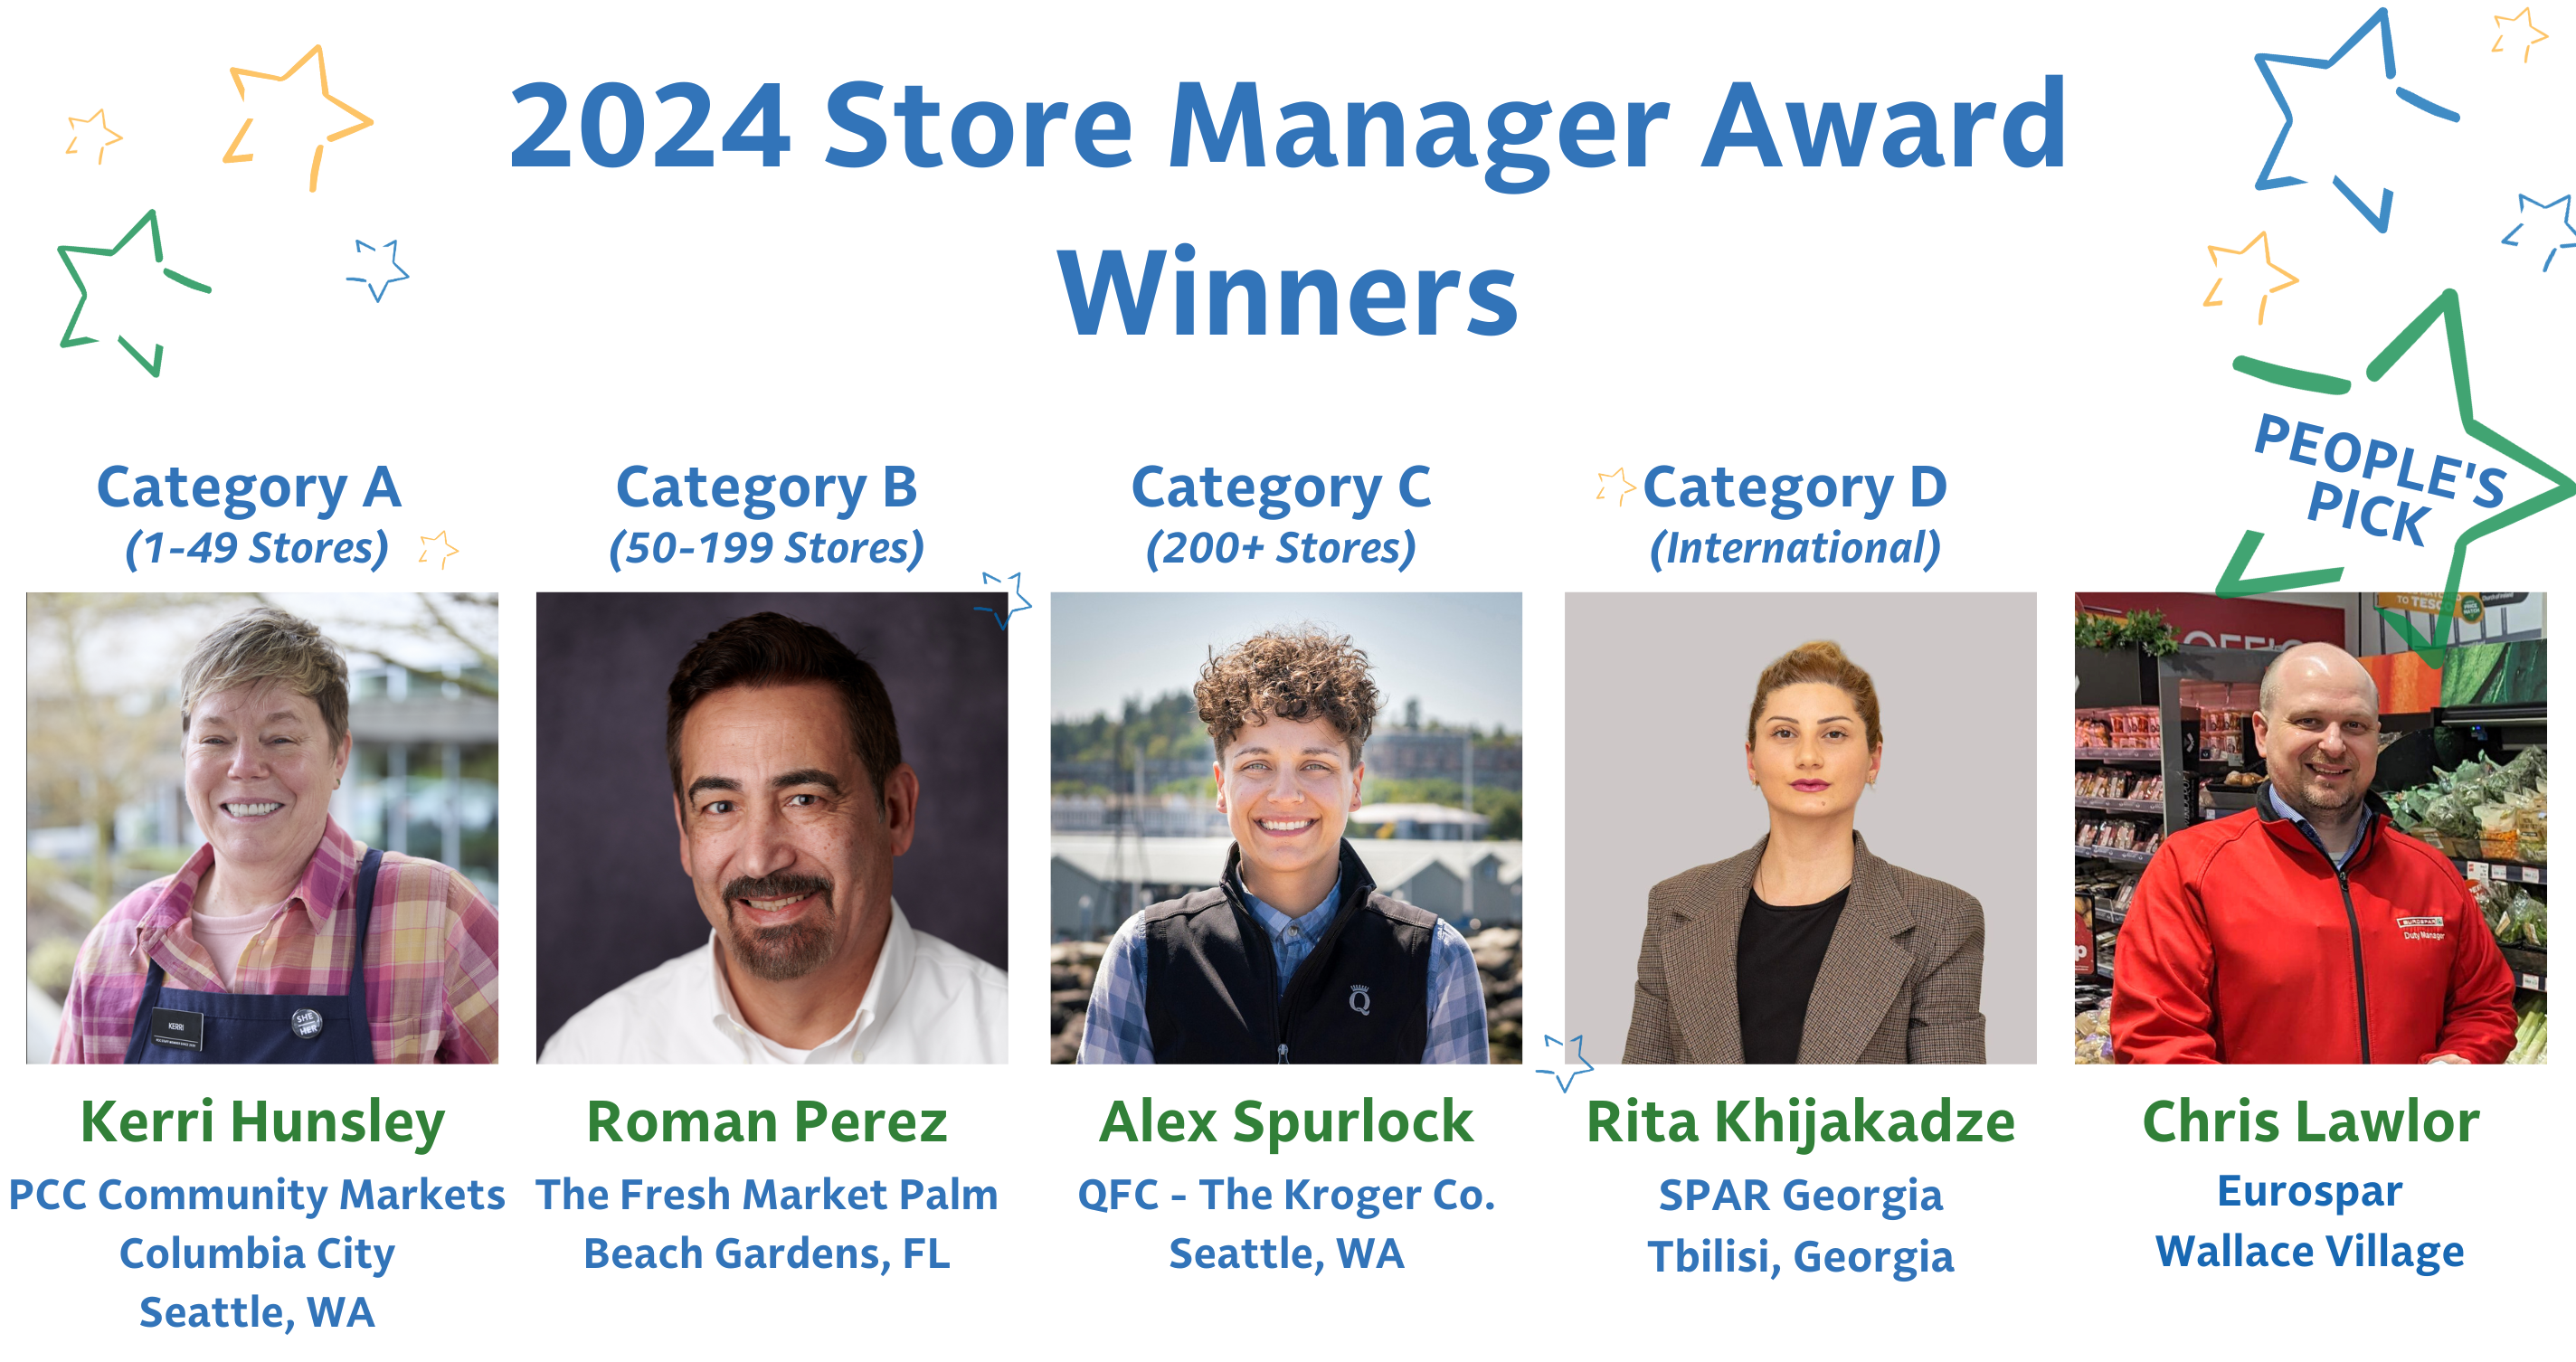 2024 Store Manager Award Winners